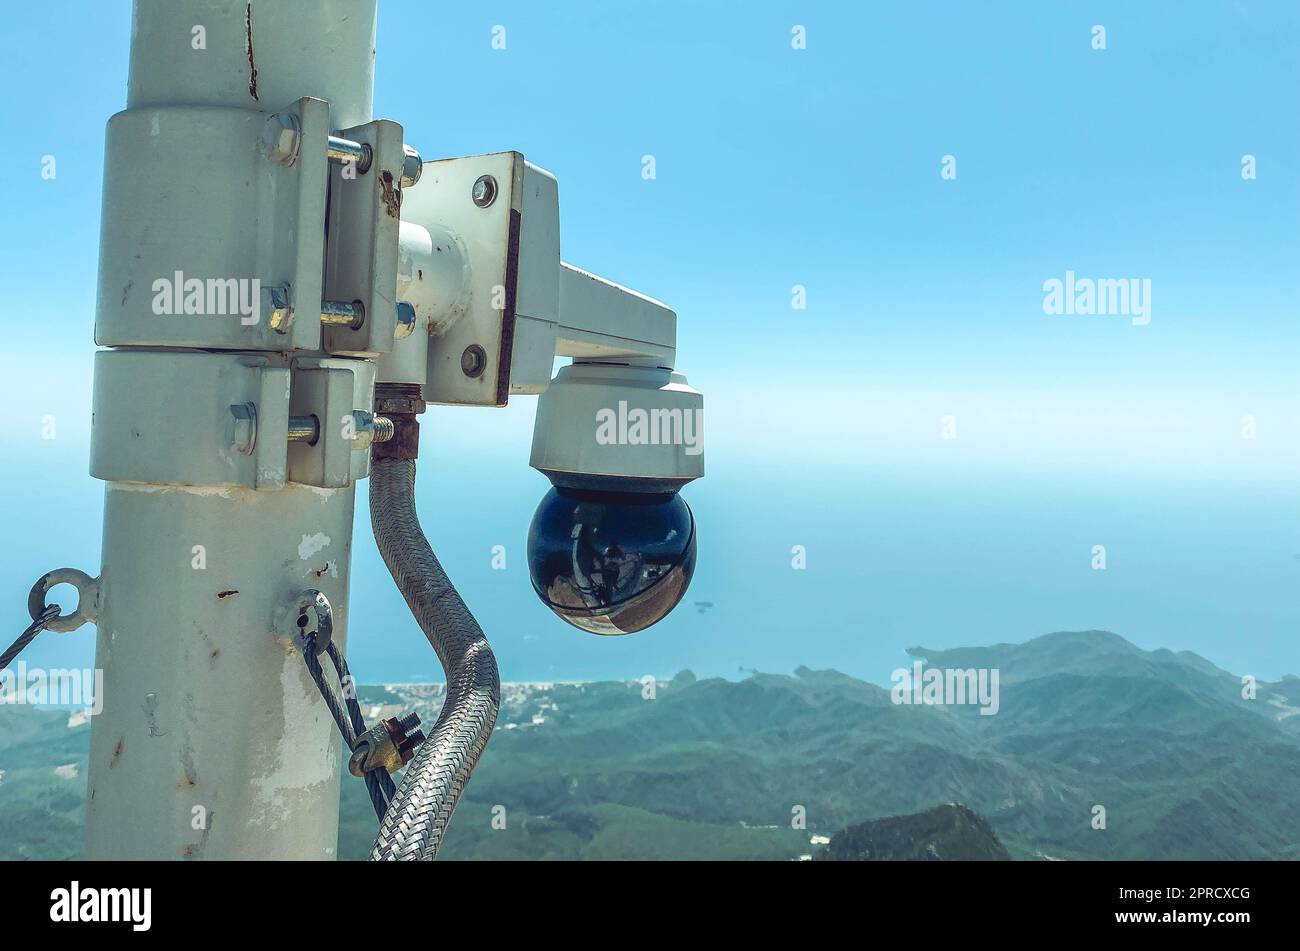 video camera on the observation platform on the mountain. small, hidden camera for recording people and tourists. keeping order in a public place. Stock Photo